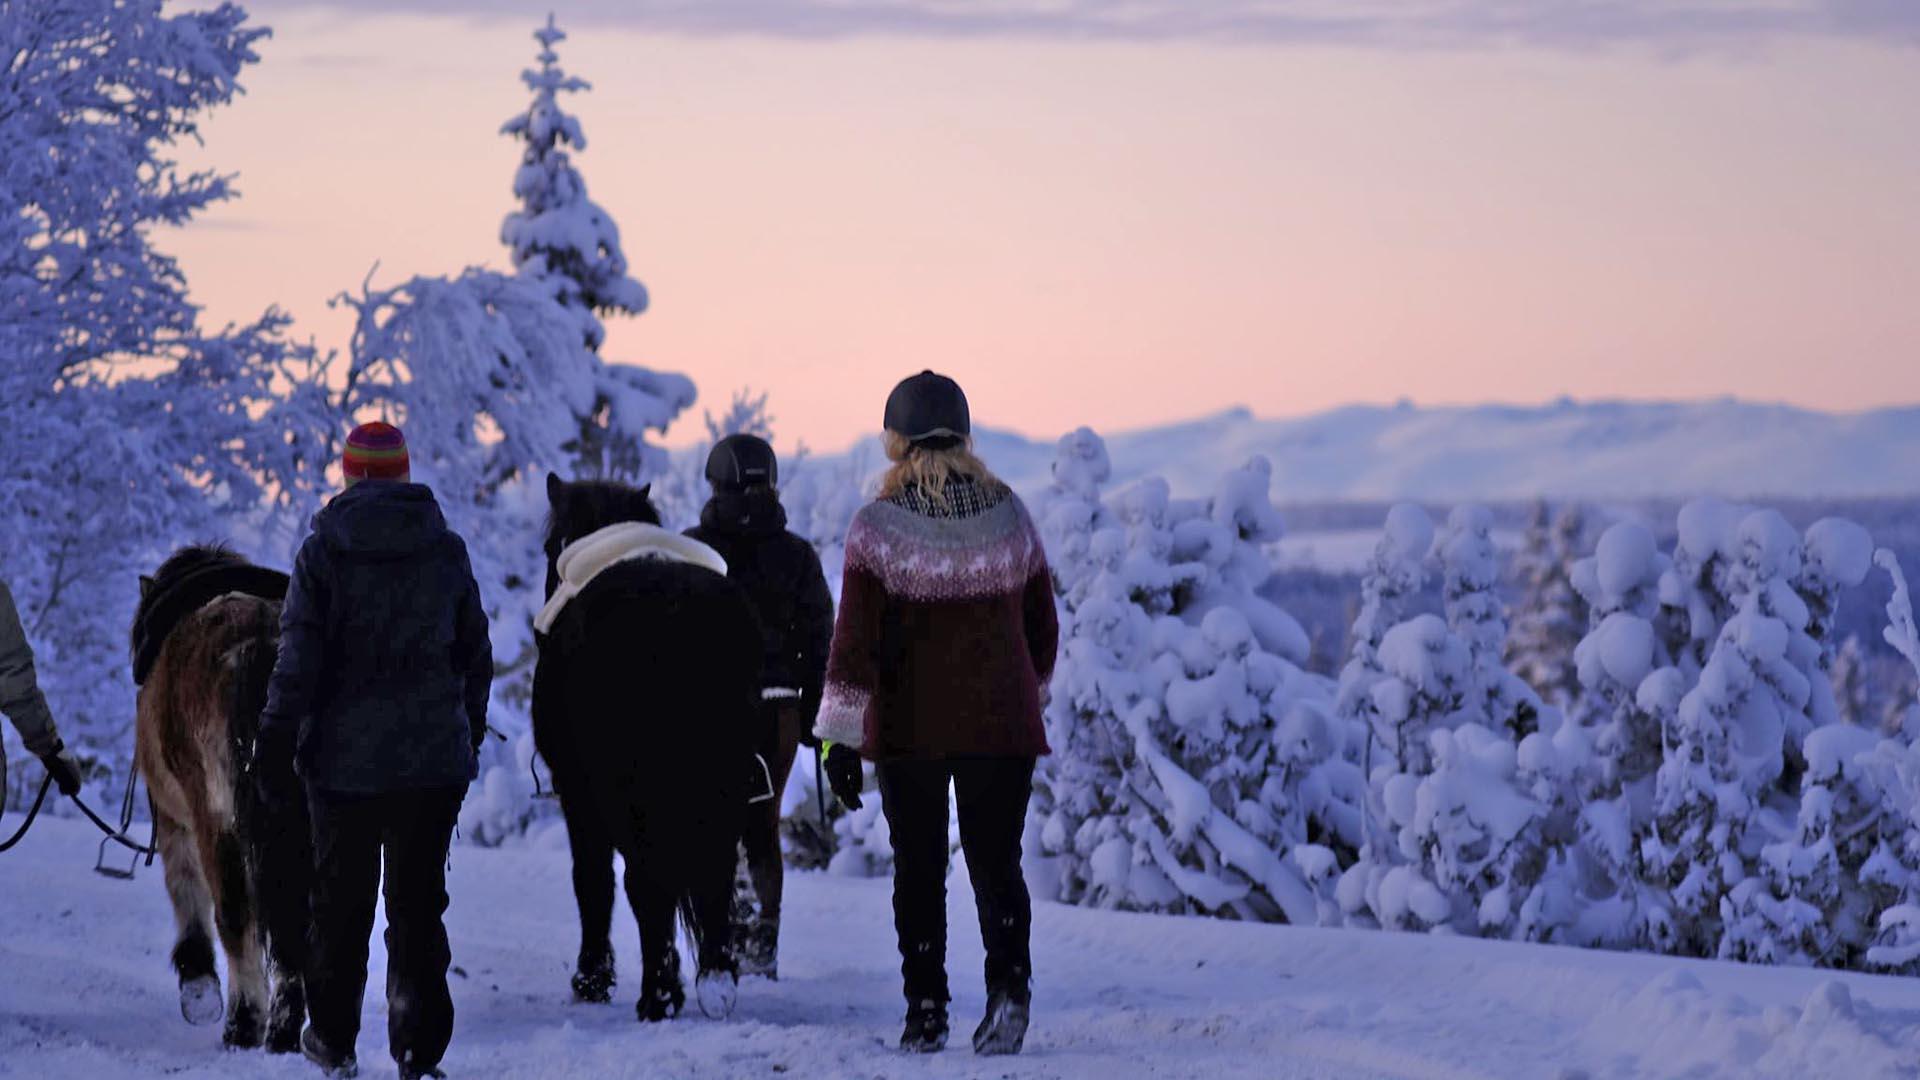 A group of horseback riders walks their horses along a wintery road with heavily snow-covered trees after the sunset.